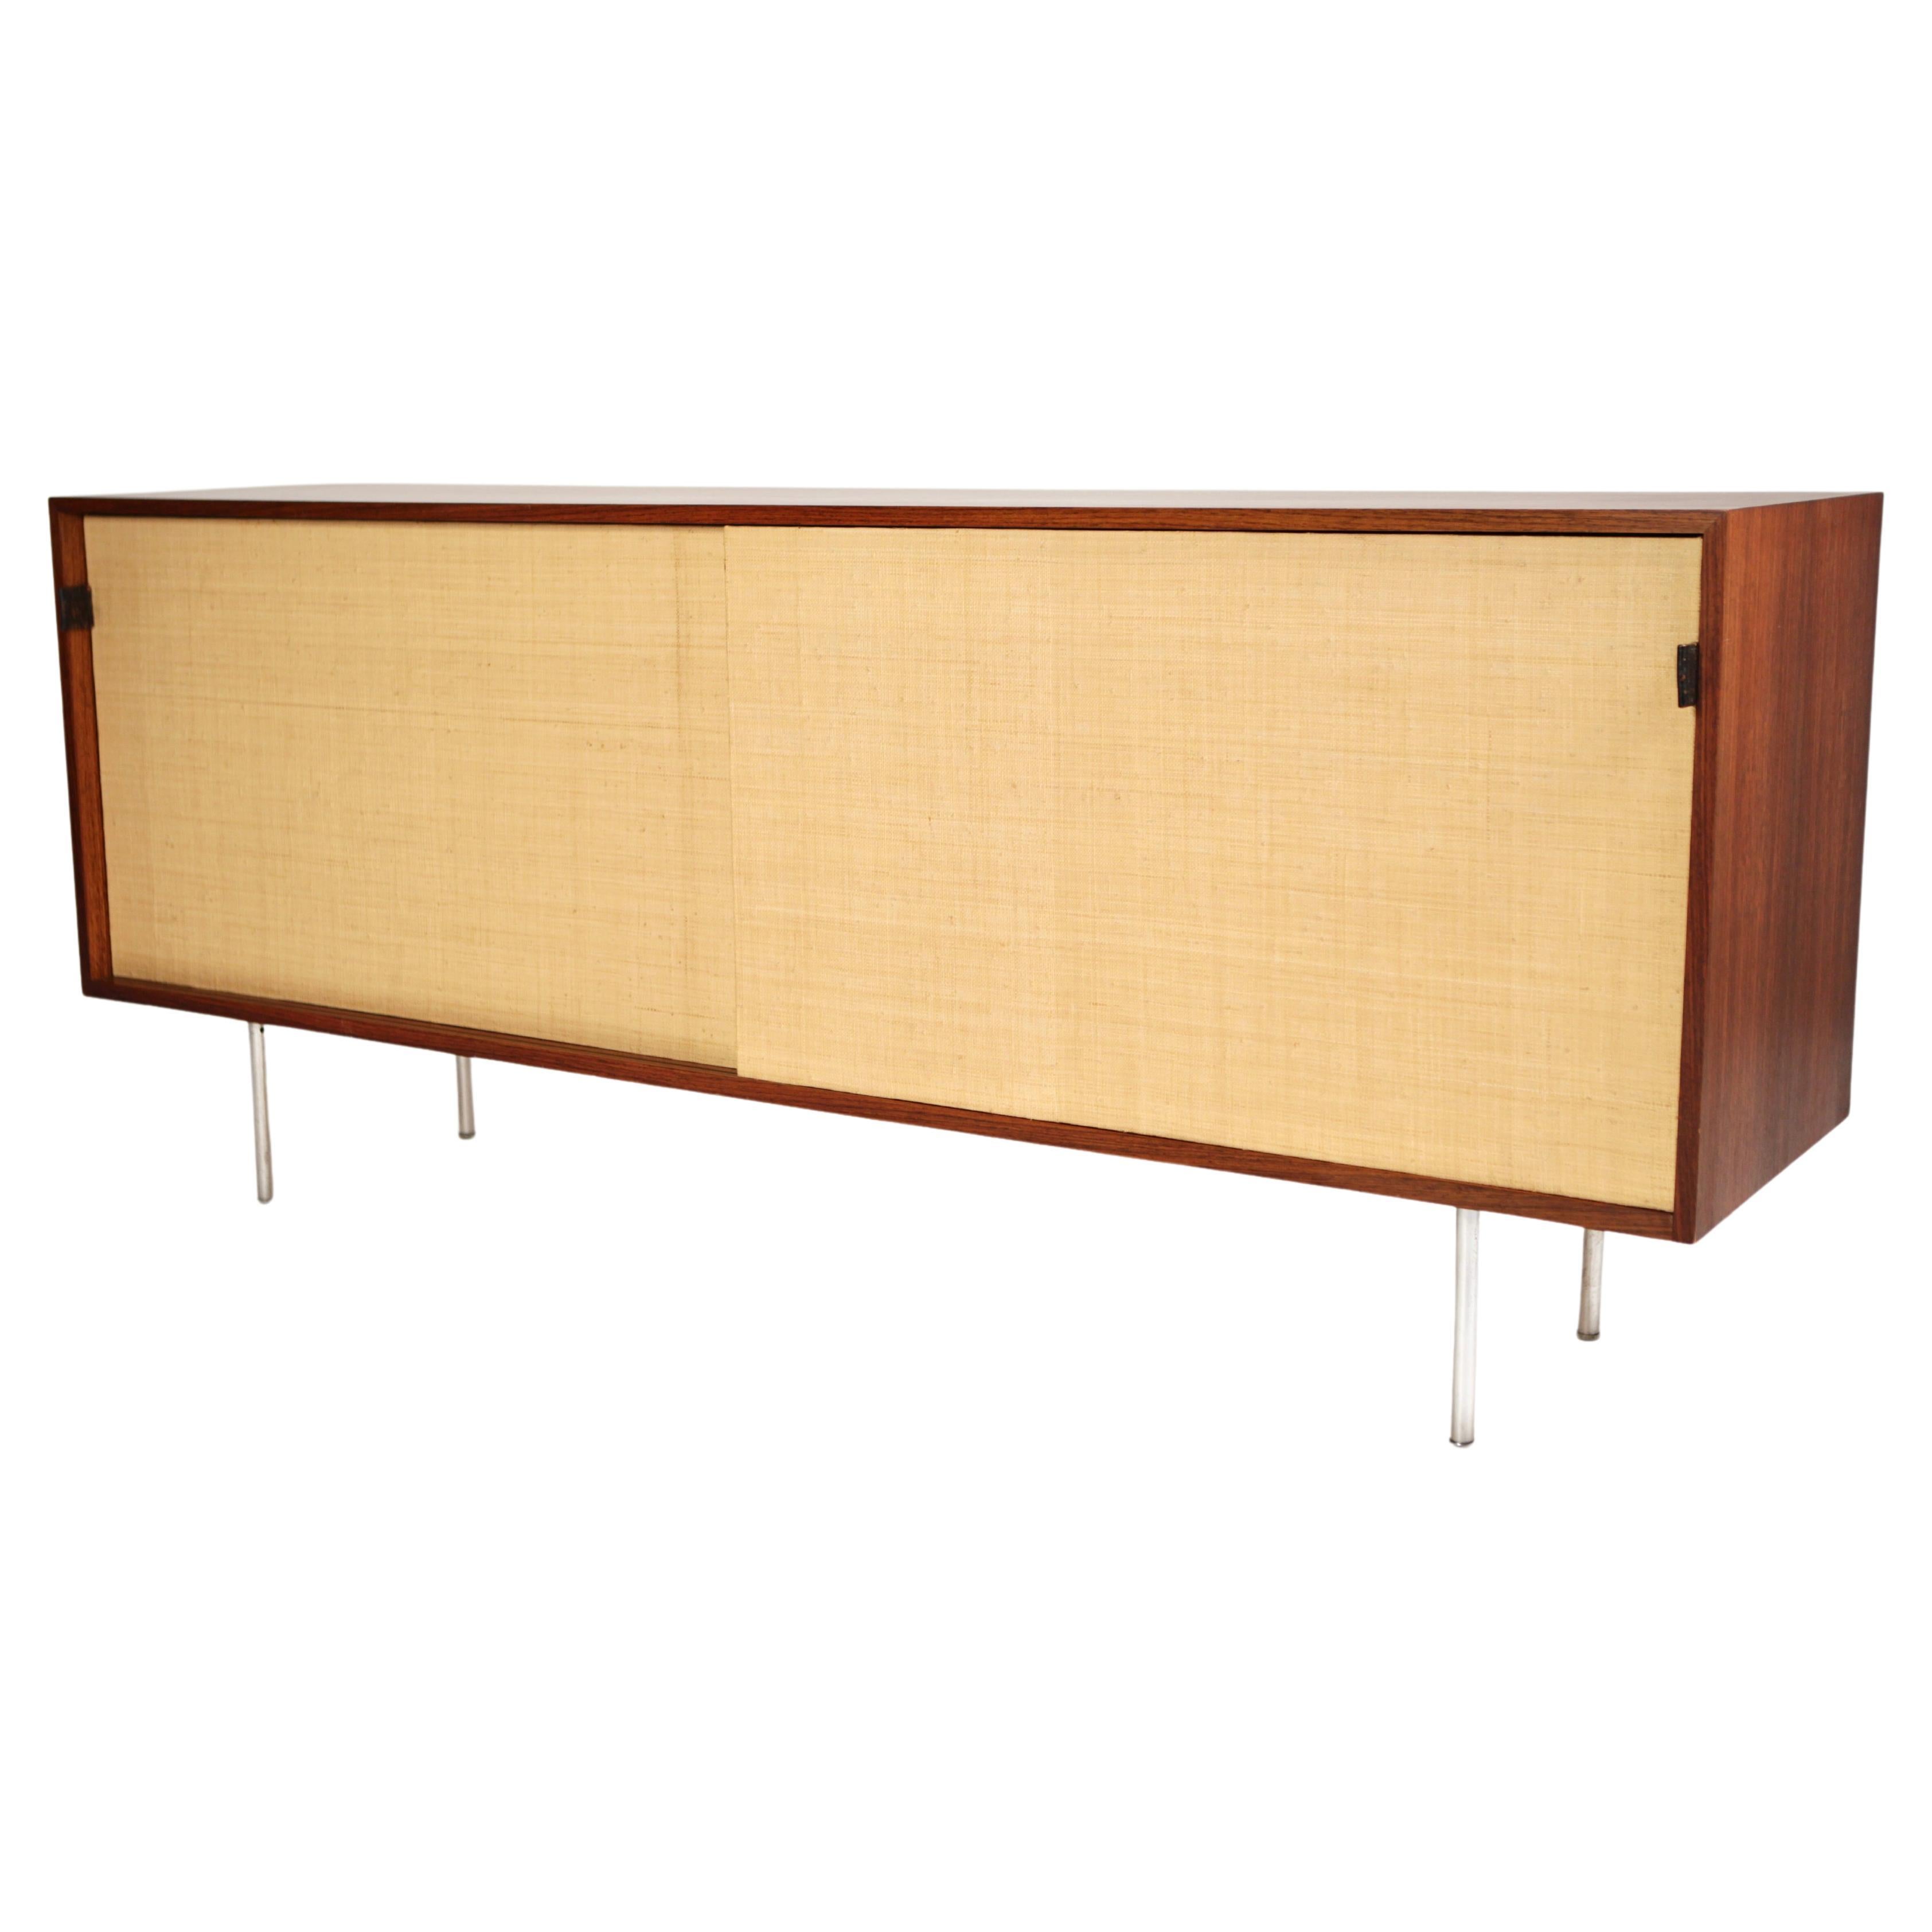 Sideboard in East Indian Rosewood & Seagrass by Florence Knoll, Designed 1947 For Sale